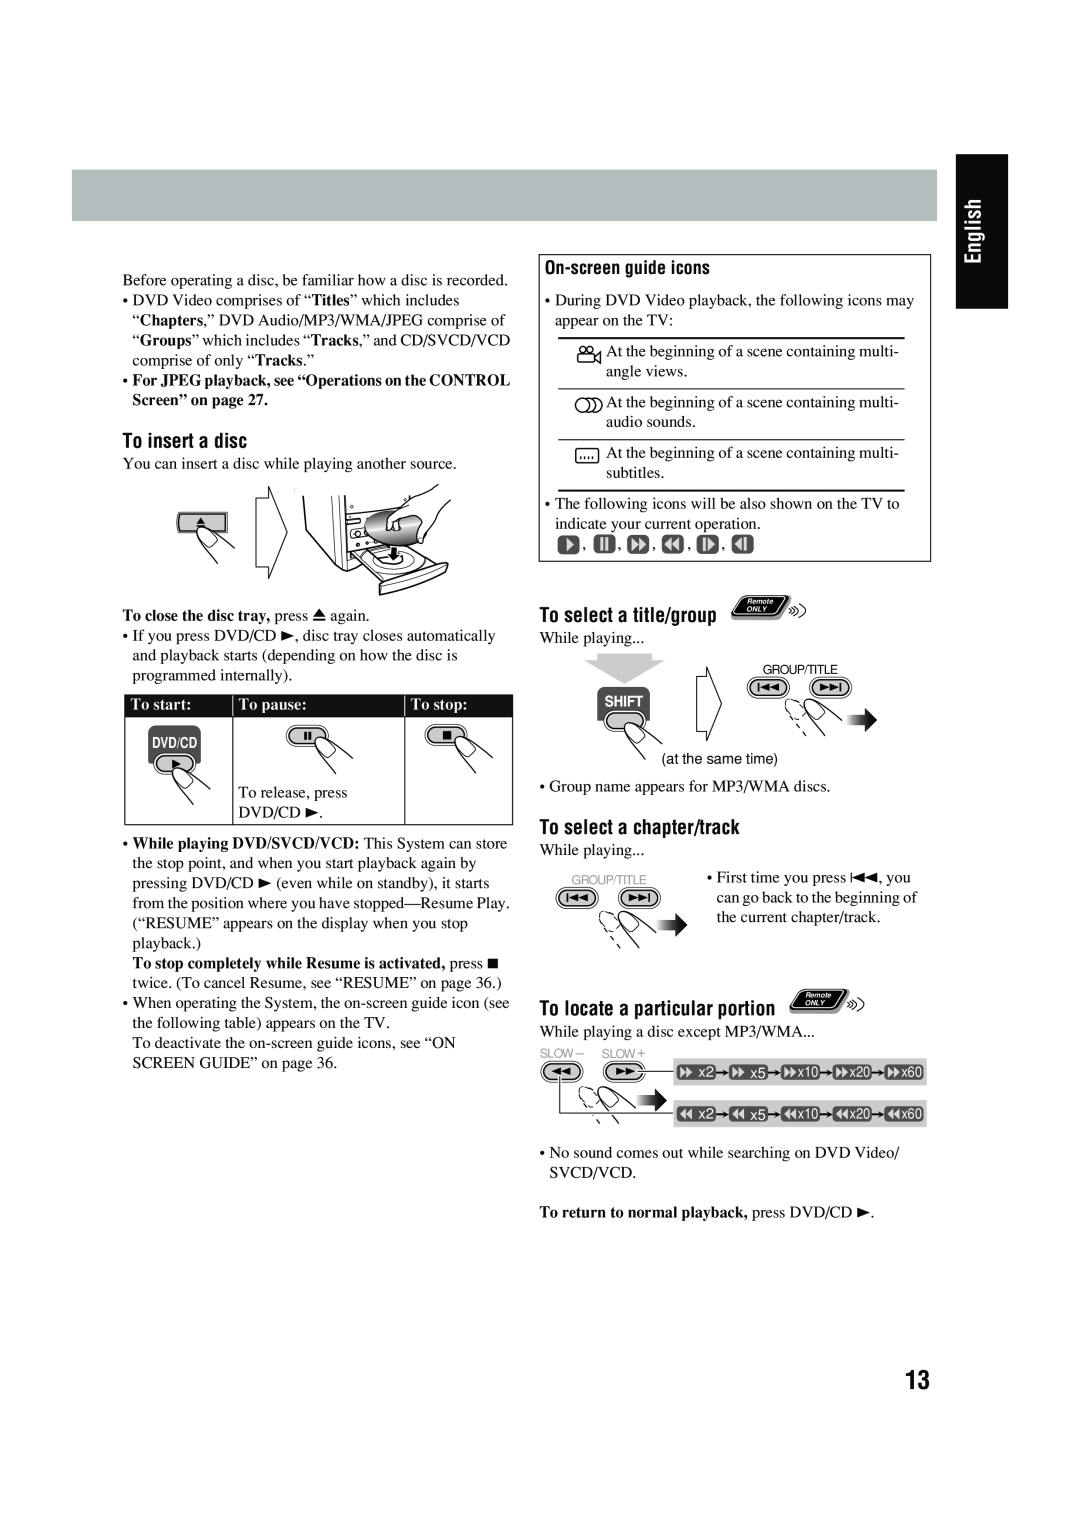 JVC UX-P450 manual English, To insert a disc, To select a chapter/track, On-screenguide icons, To select a title/group 